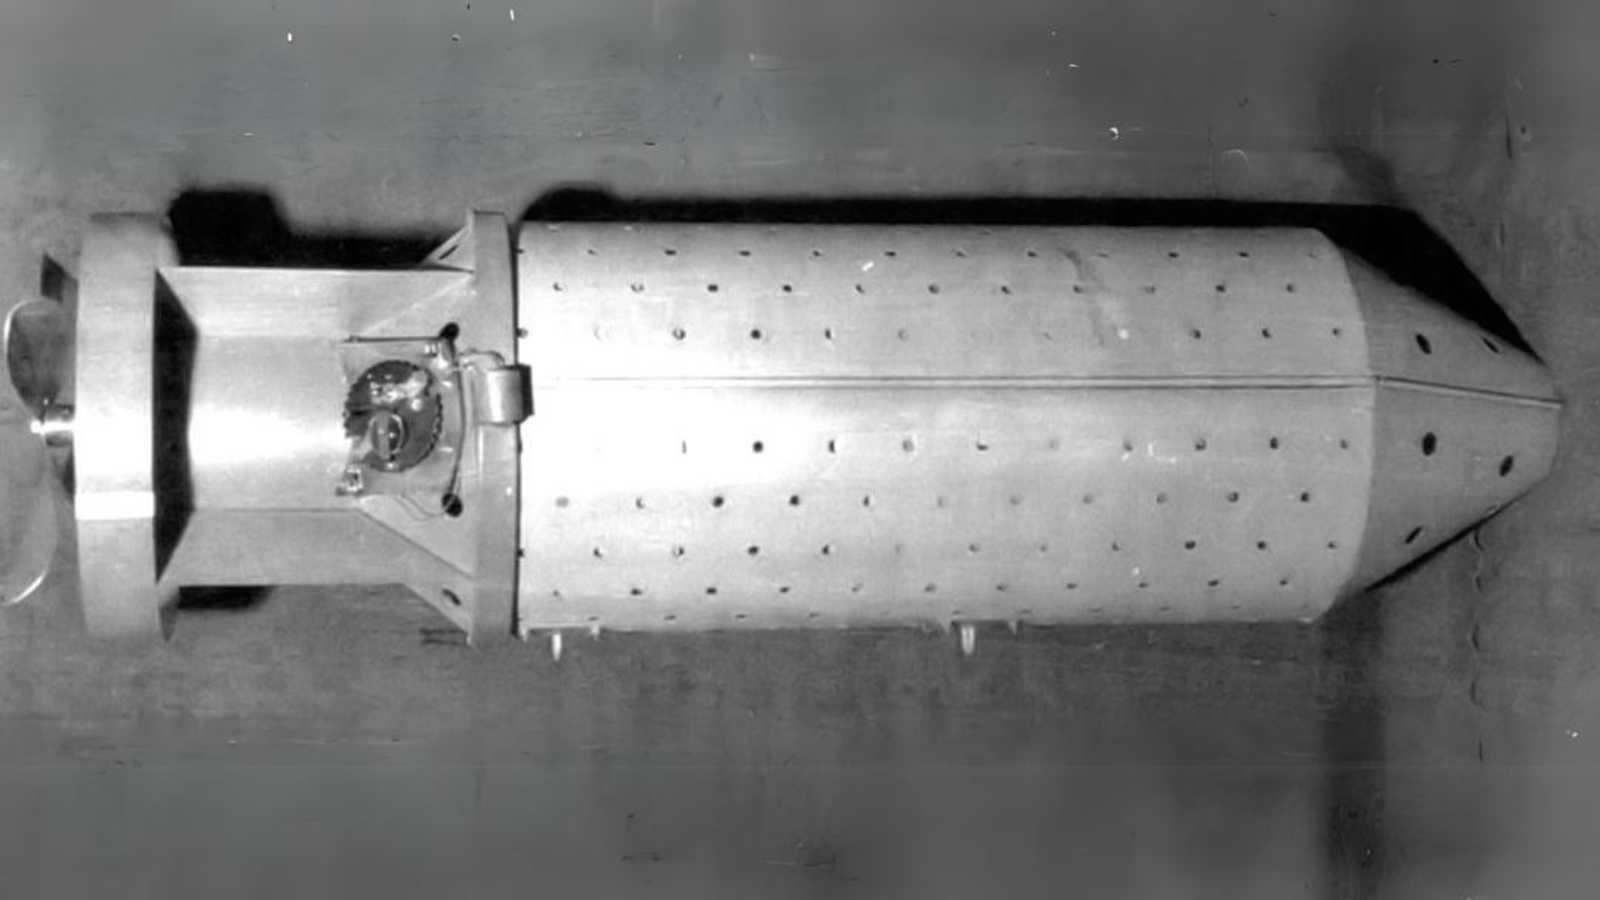 <p>Each bat bomb would contain over 1,000 compartments containing hibernating bats. The bats would have incendiary devices attached to them. The plan was to drop the bombs on Japanese targets where the bats would roost in wooden and paper structures. Then, the devices would go off, burning buildings that bombers may not reach.</p>